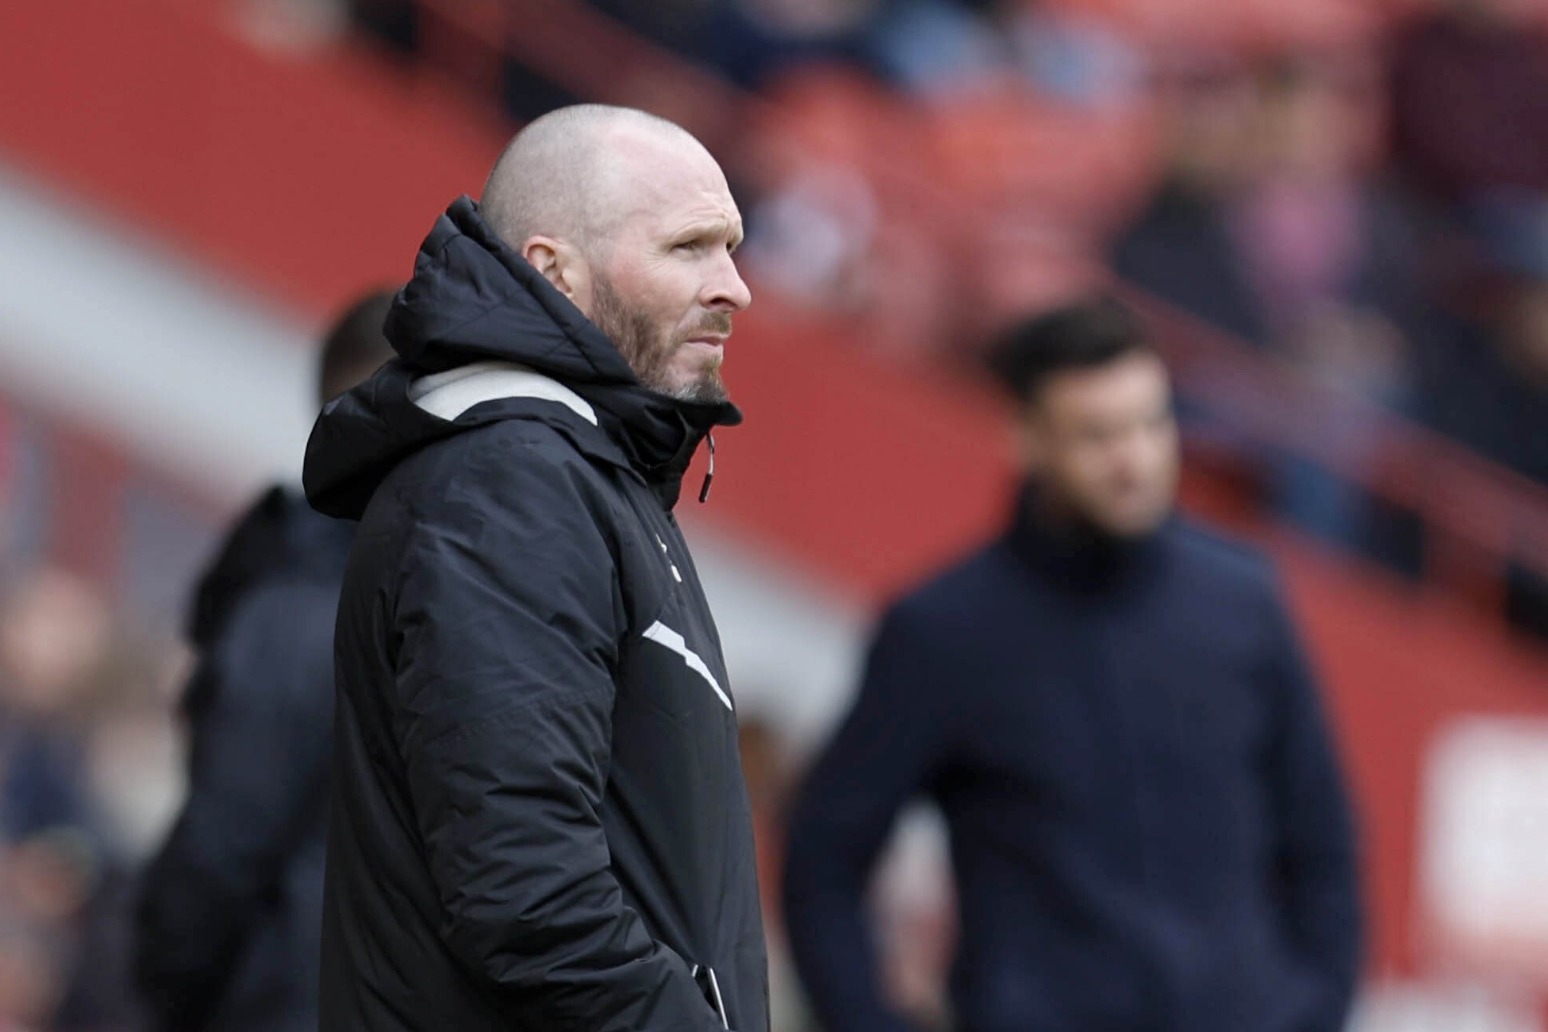 Michael Appleton urging men to check themselves for testicular cancer 